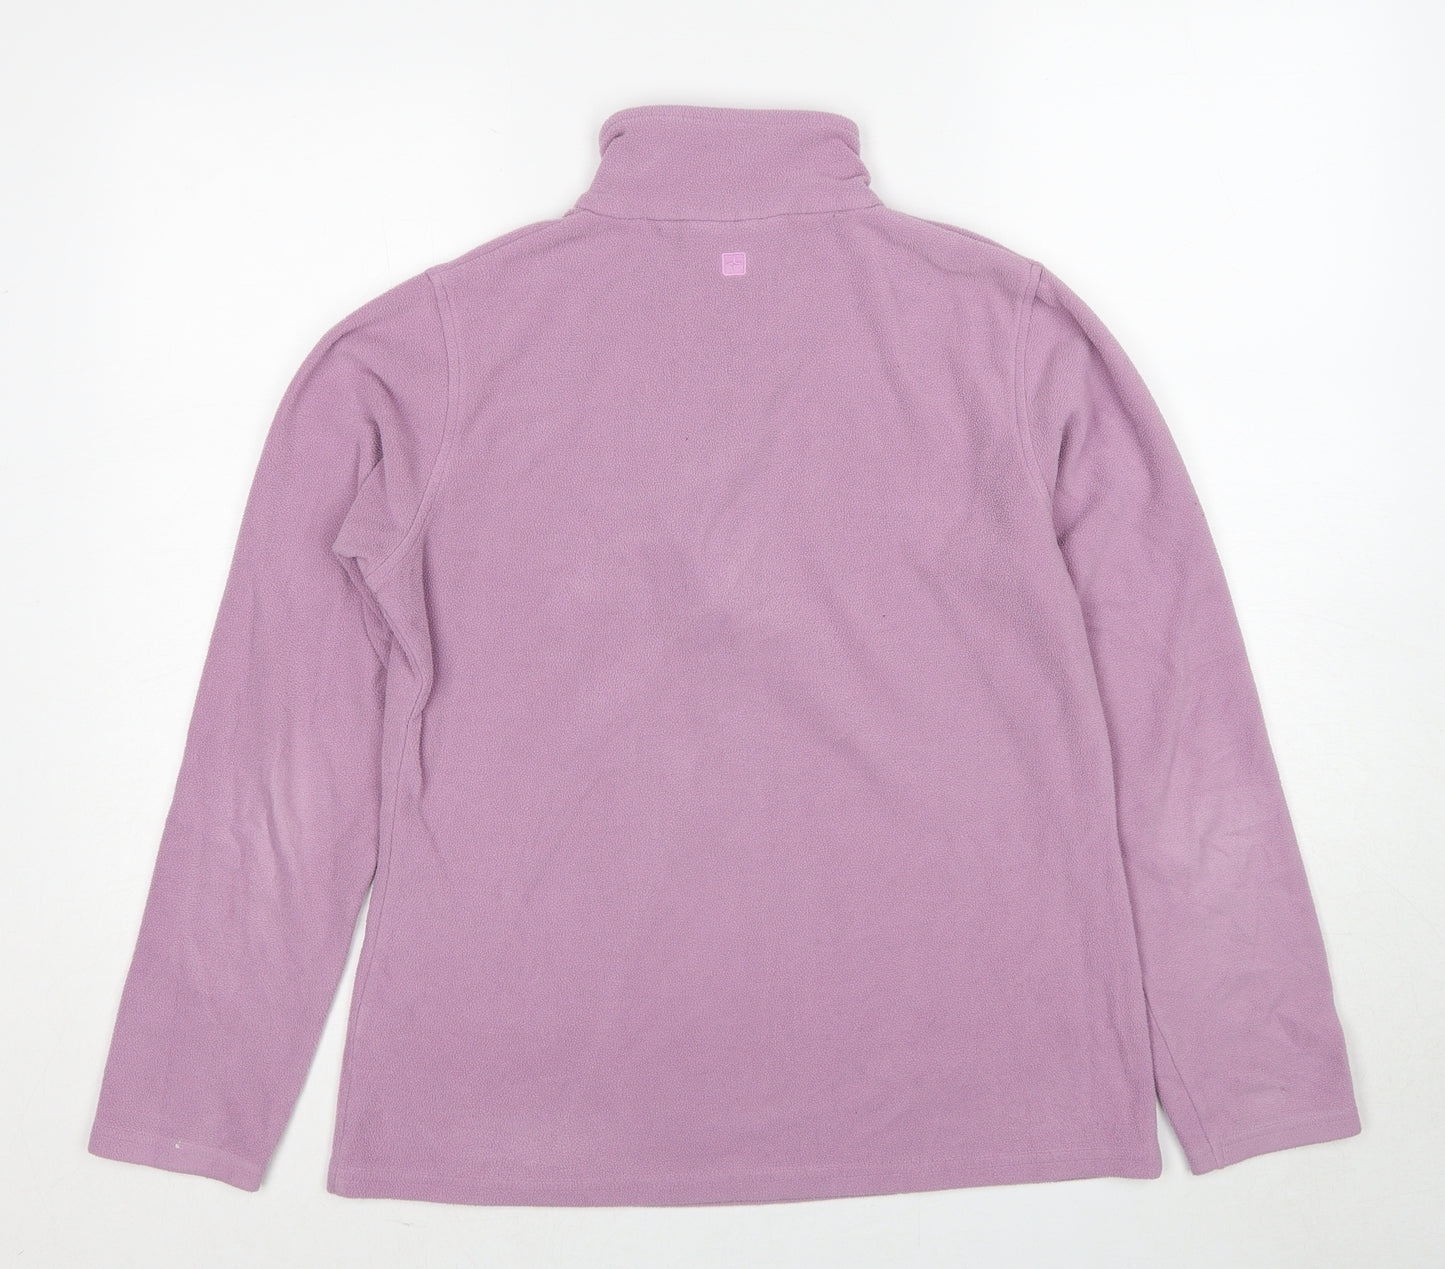 Mountain Warehouse Womens Purple Polyester Pullover Sweatshirt Size M Pullover